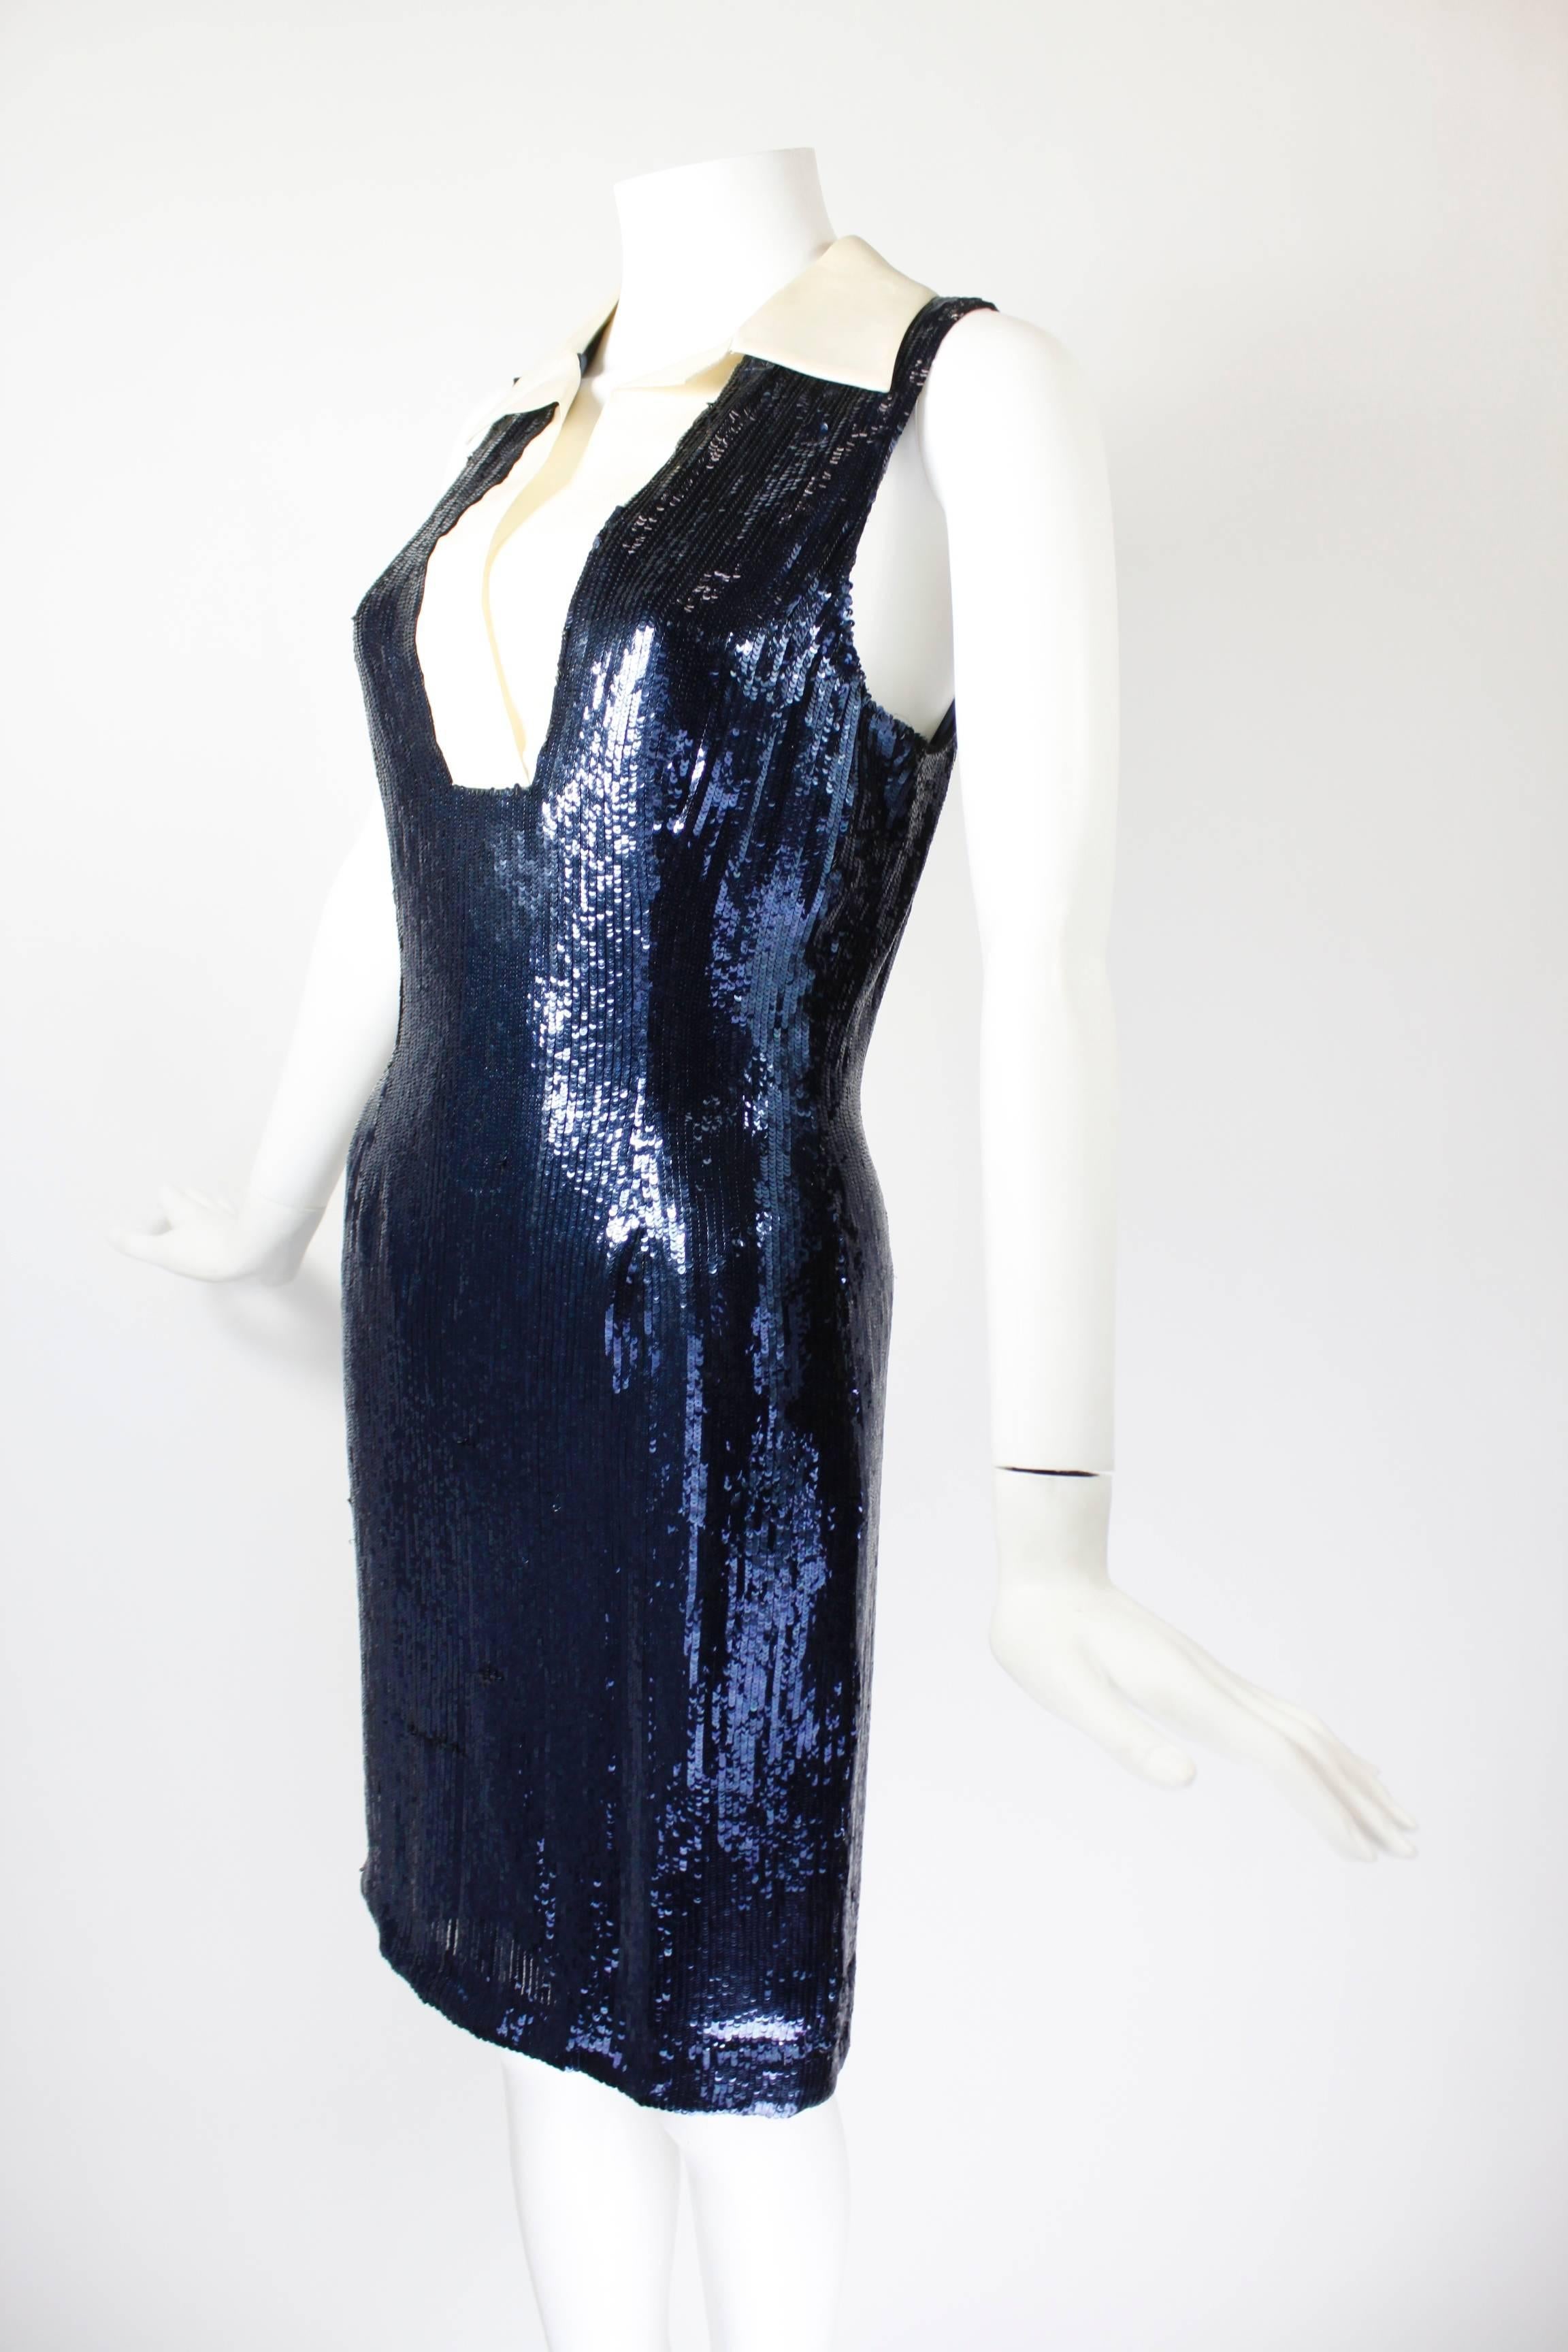 1980s Bill Blass Sequined Sailor Cocktail Dress In Excellent Condition For Sale In Los Angeles, CA